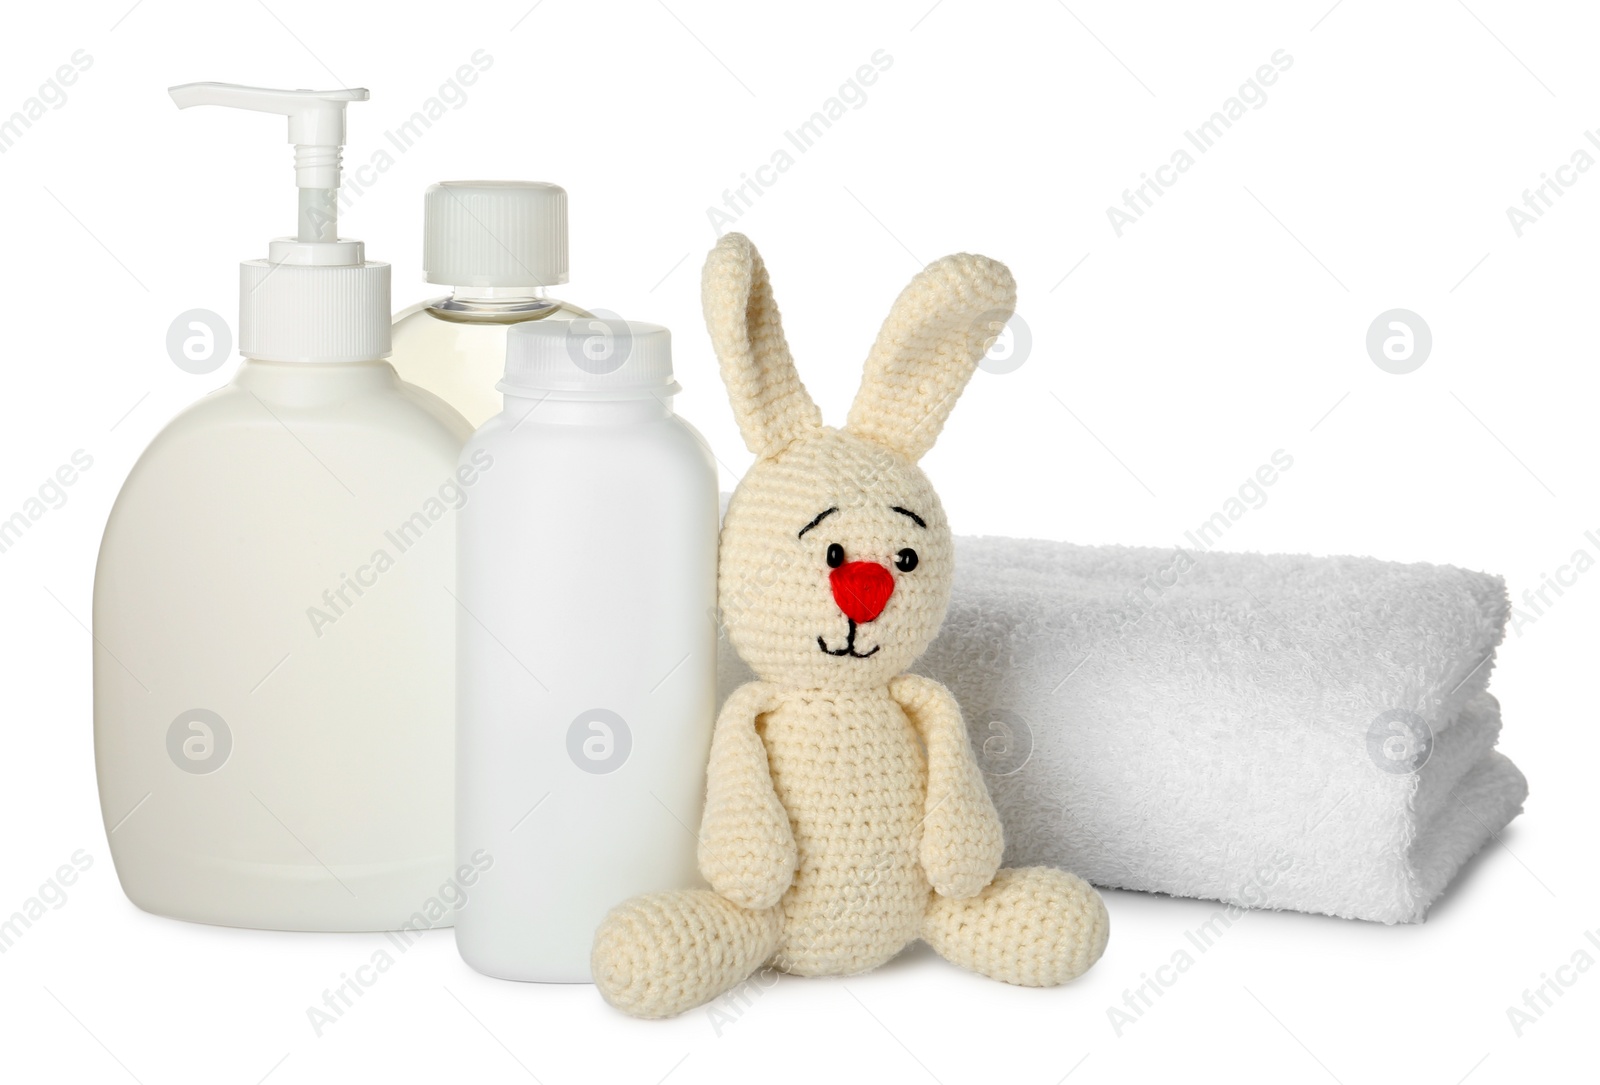 Photo of Bottles of baby cosmetic products, towel and bunny toy on white background